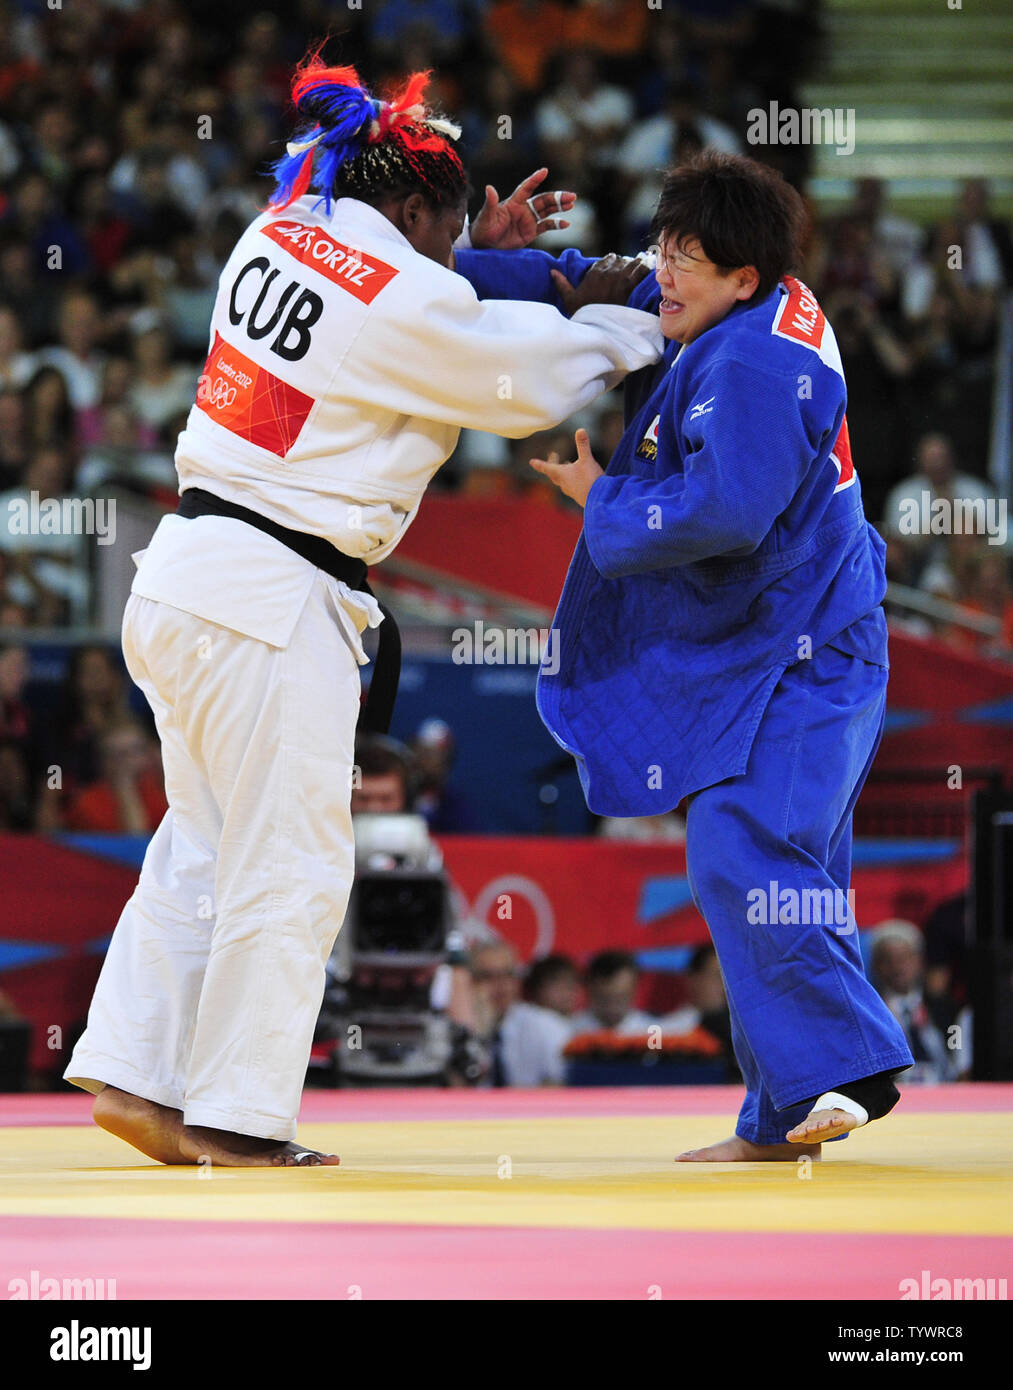 Idalys Ortiz of Cuba battles Mika Sugimoto of Japan in the Women's 78kg Gold Medal Judo contest at the London 2012 Summer Olympics on August 3, 2012 in London. Ortiz won the contest and the gold.  UPI/Ron Sachs Stock Photo